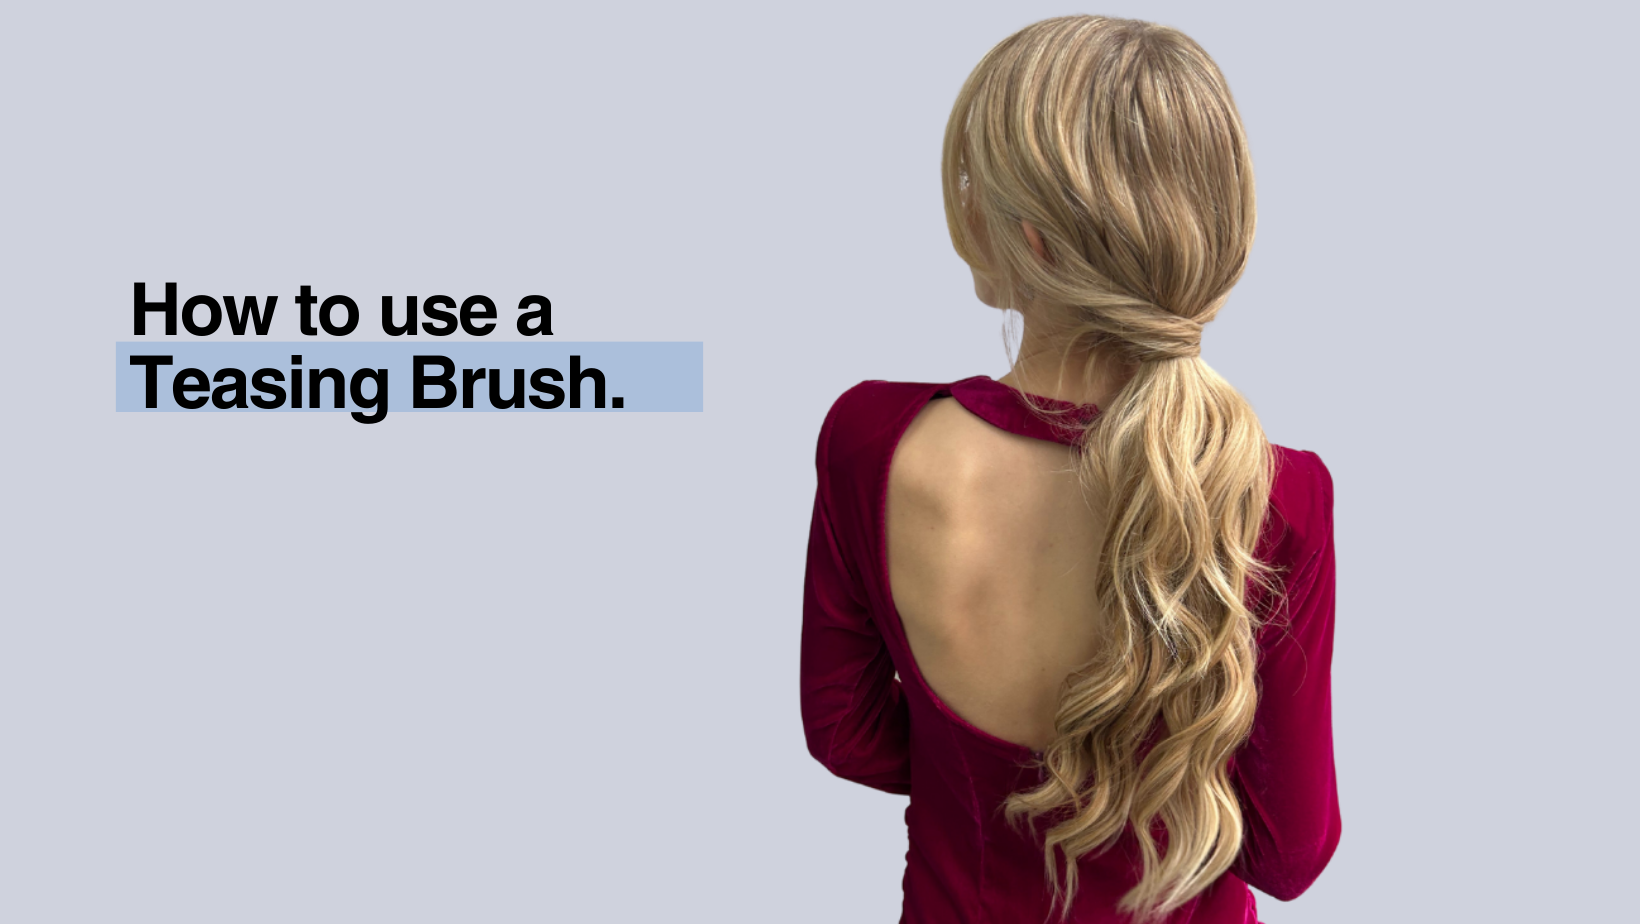 How To Use a Teasing Brush 